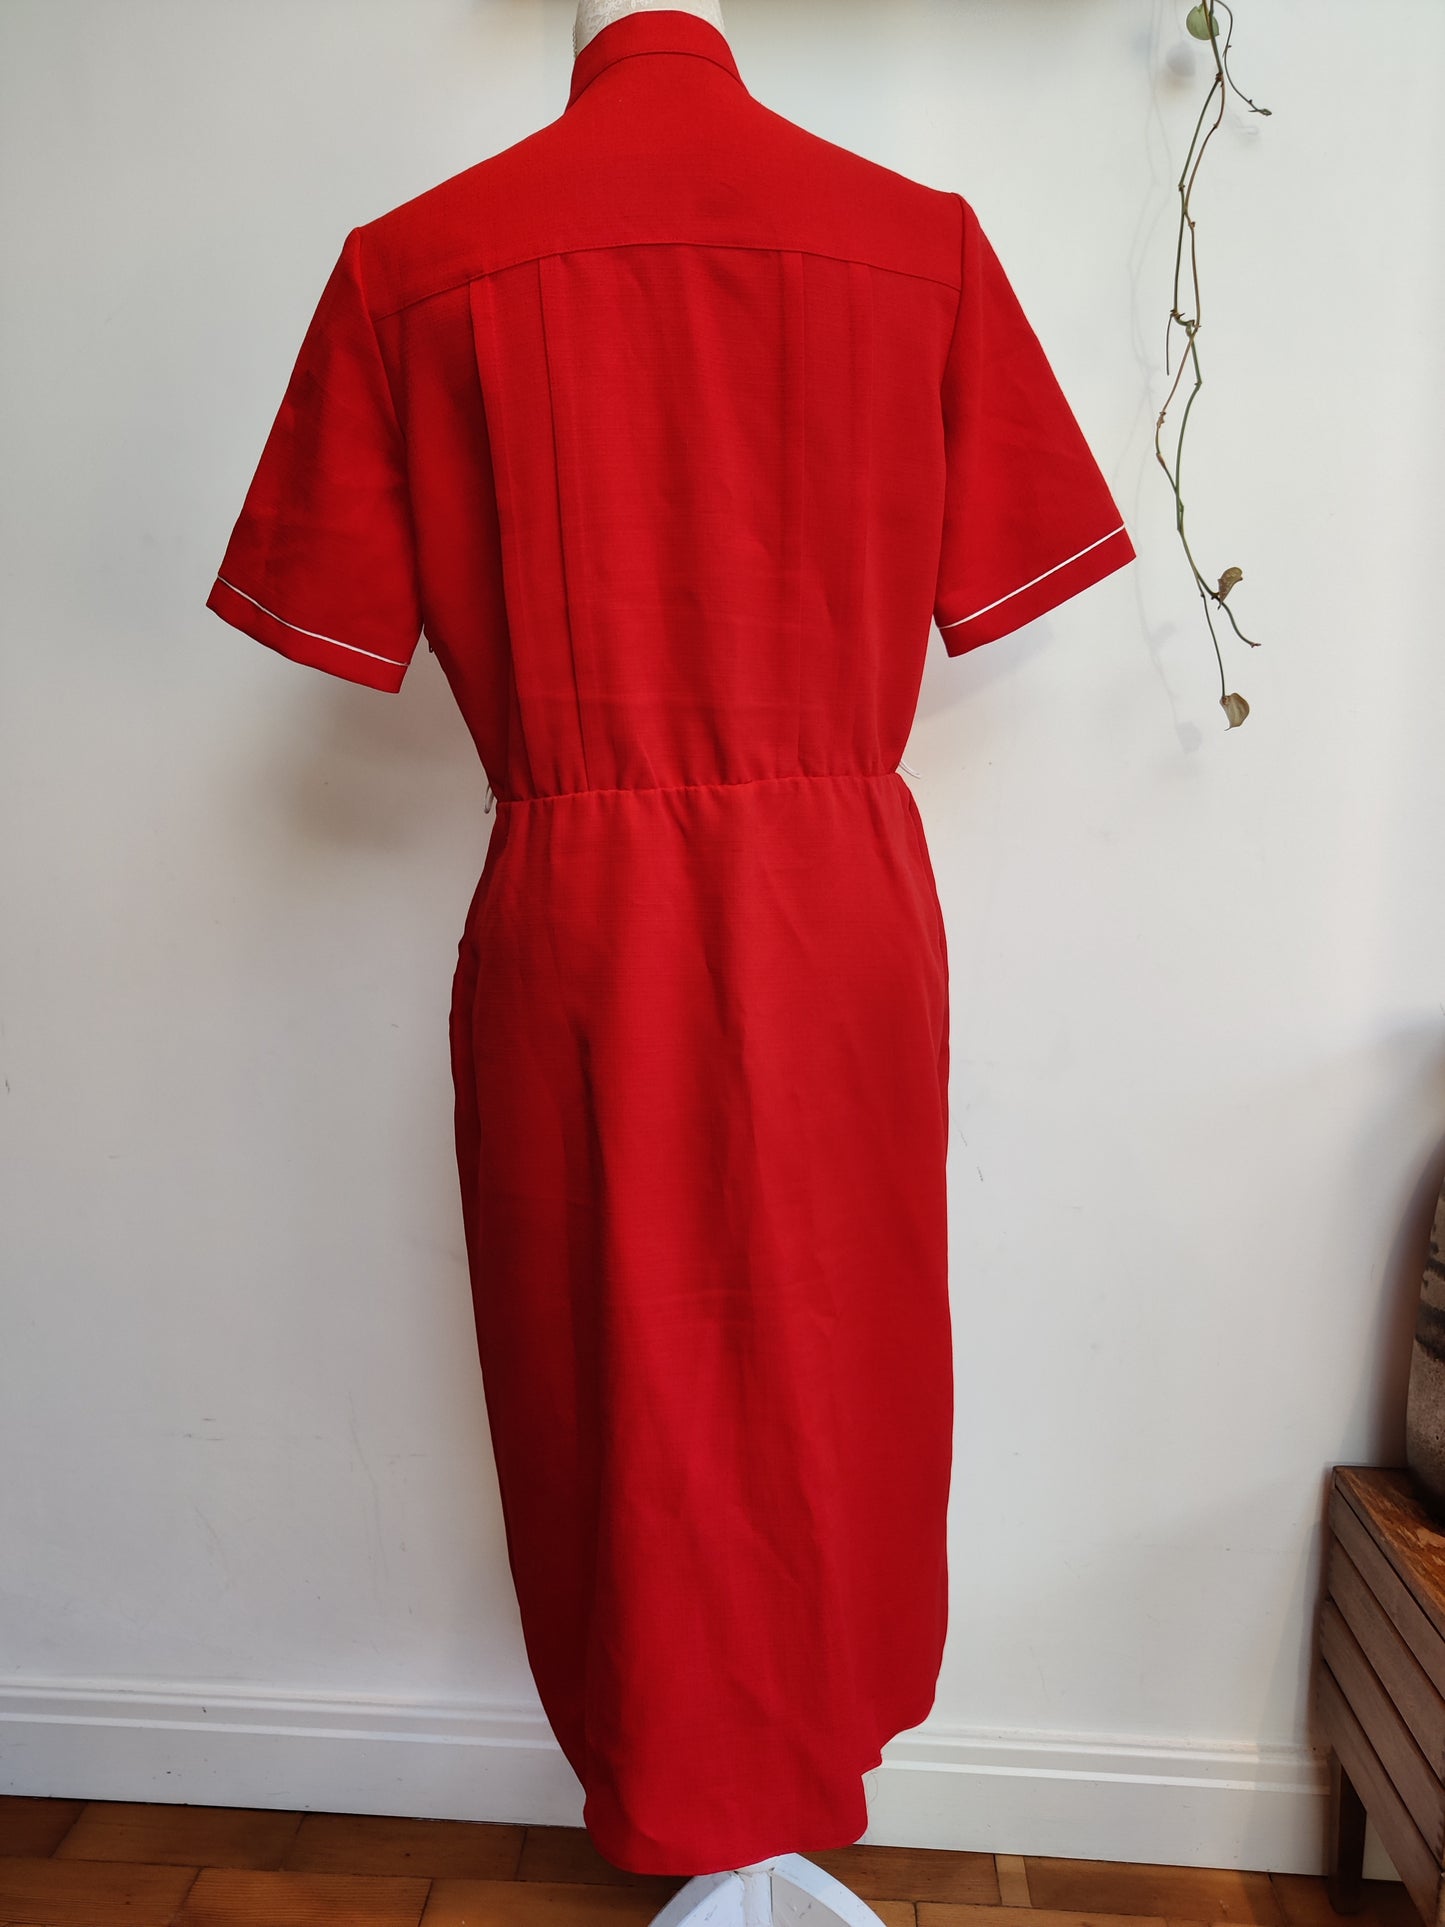 Stunning red 50s style vintage dress. Size 12-14.